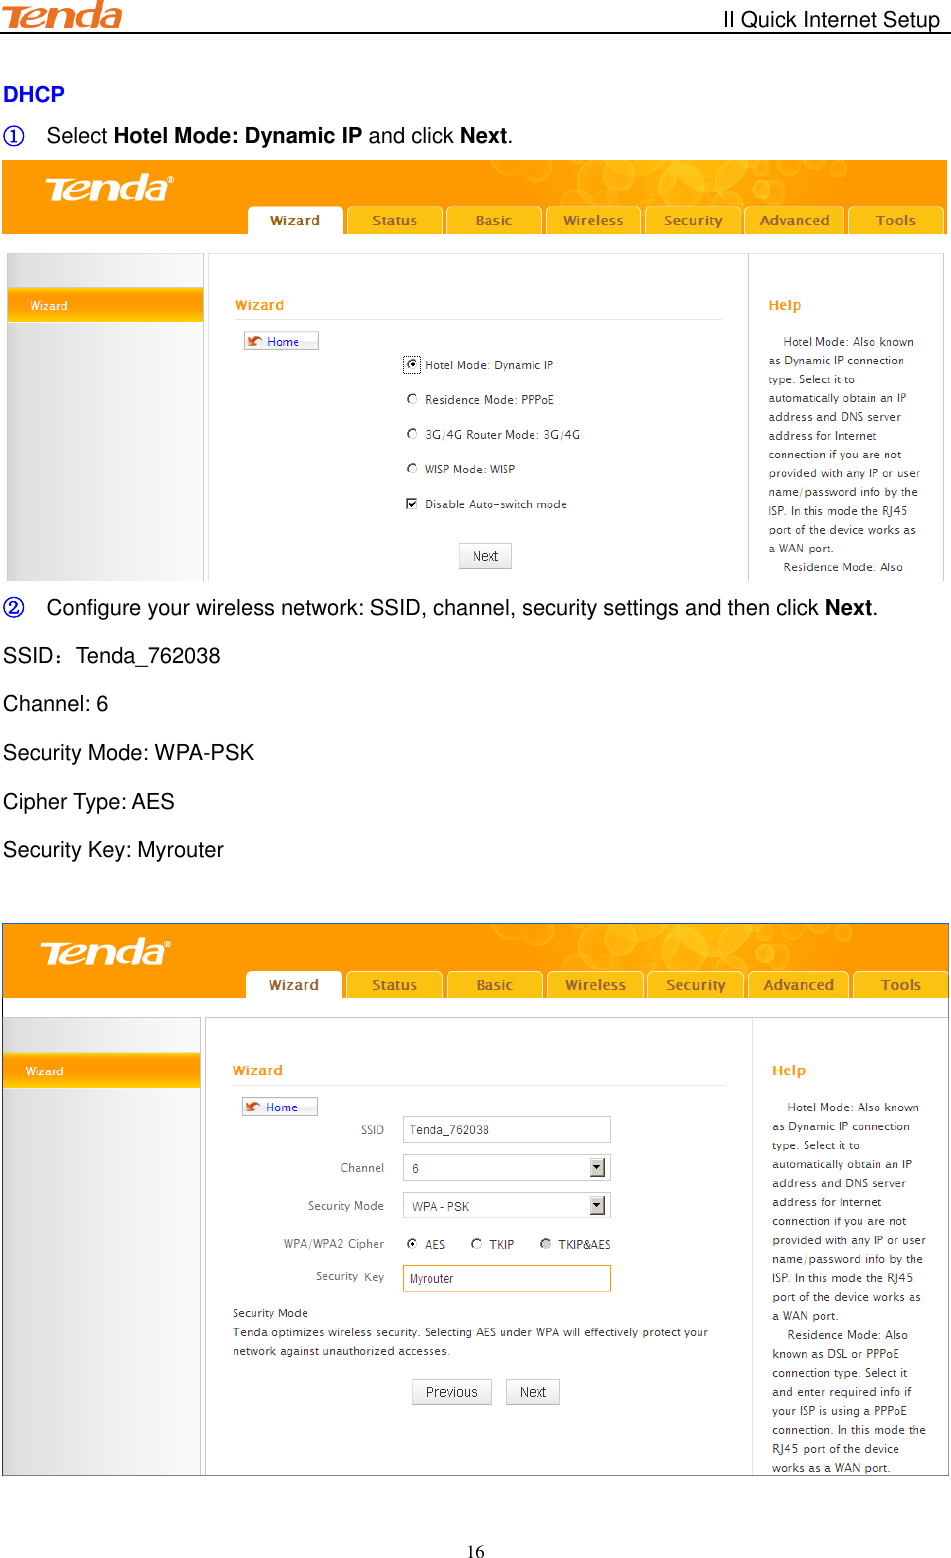                                                        II Quick Internet Setup         16 DHCP ① Select Hotel Mode: Dynamic IP and click Next.  ② Configure your wireless network: SSID, channel, security settings and then click Next. SSID：Tenda_762038 Channel: 6 Security Mode: WPA-PSK               Cipher Type: AES               Security Key: Myrouter   